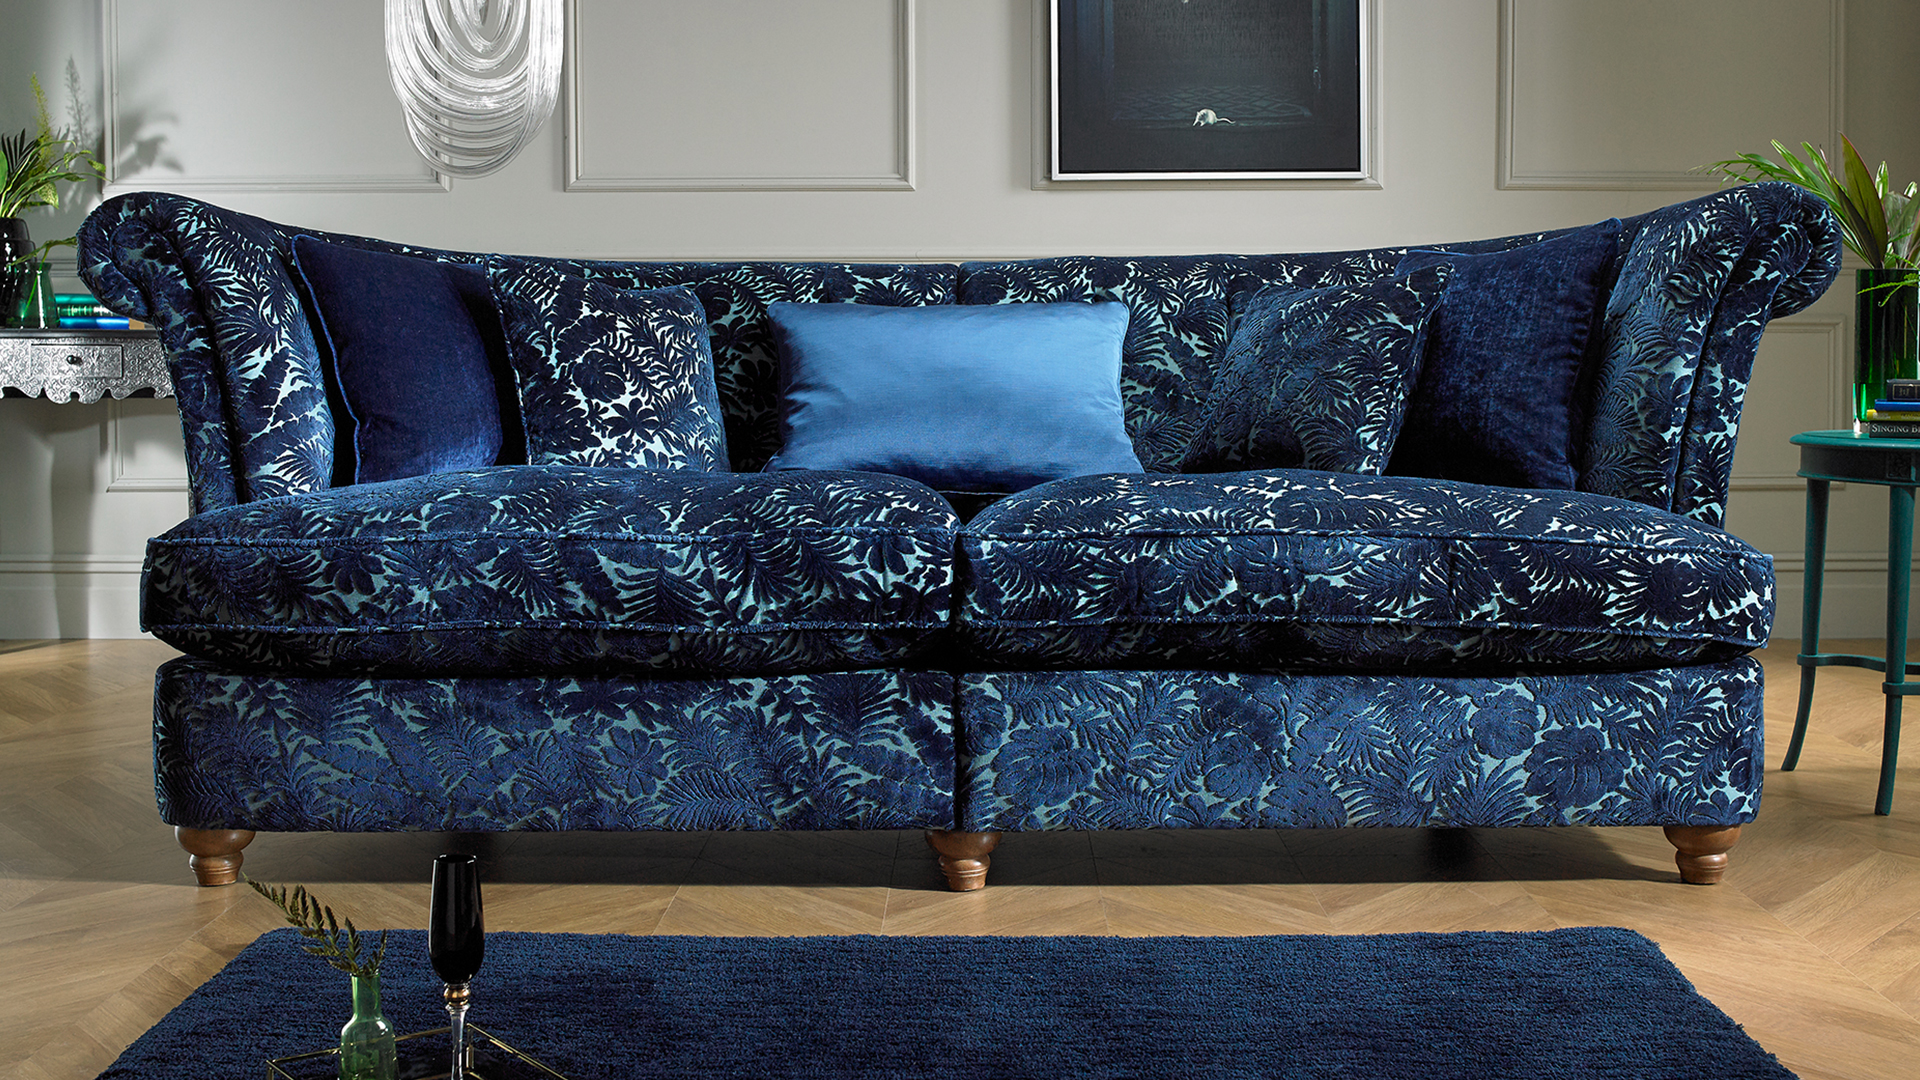 What does your sofa say about you?